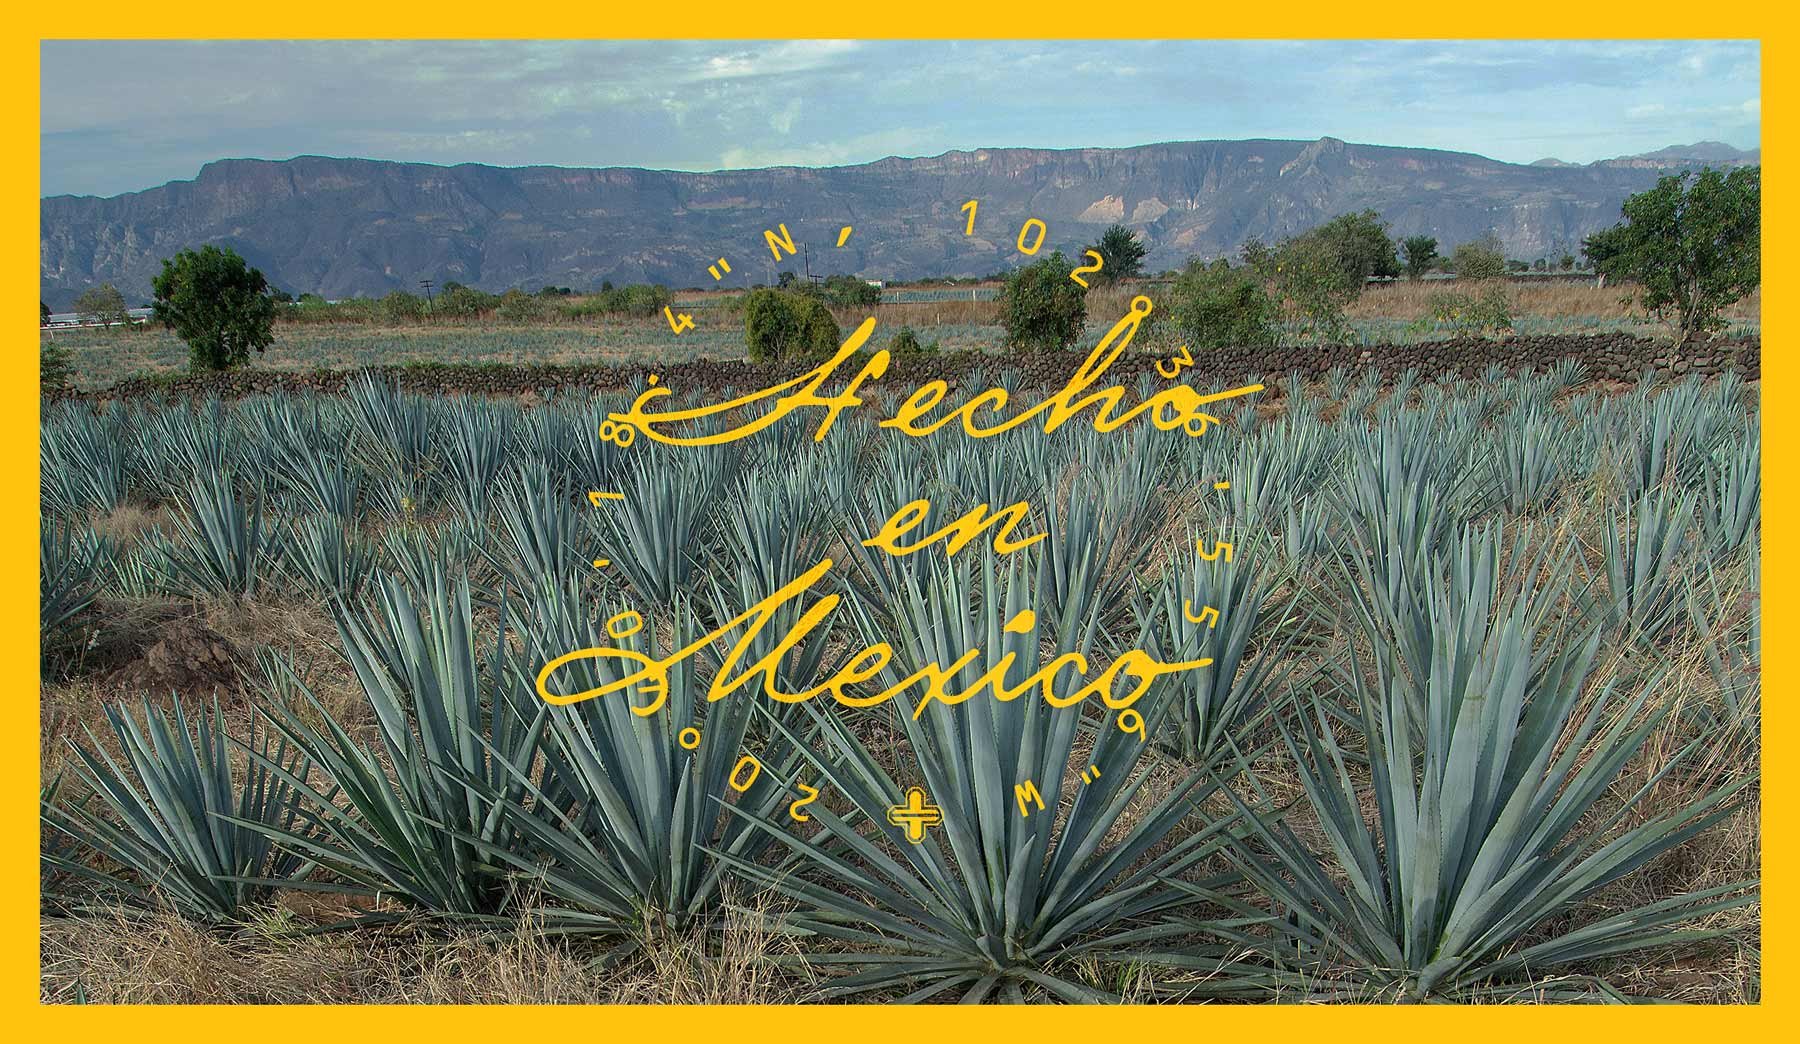 Telson-tequila-hecho-en-mexico-agaves.jpg